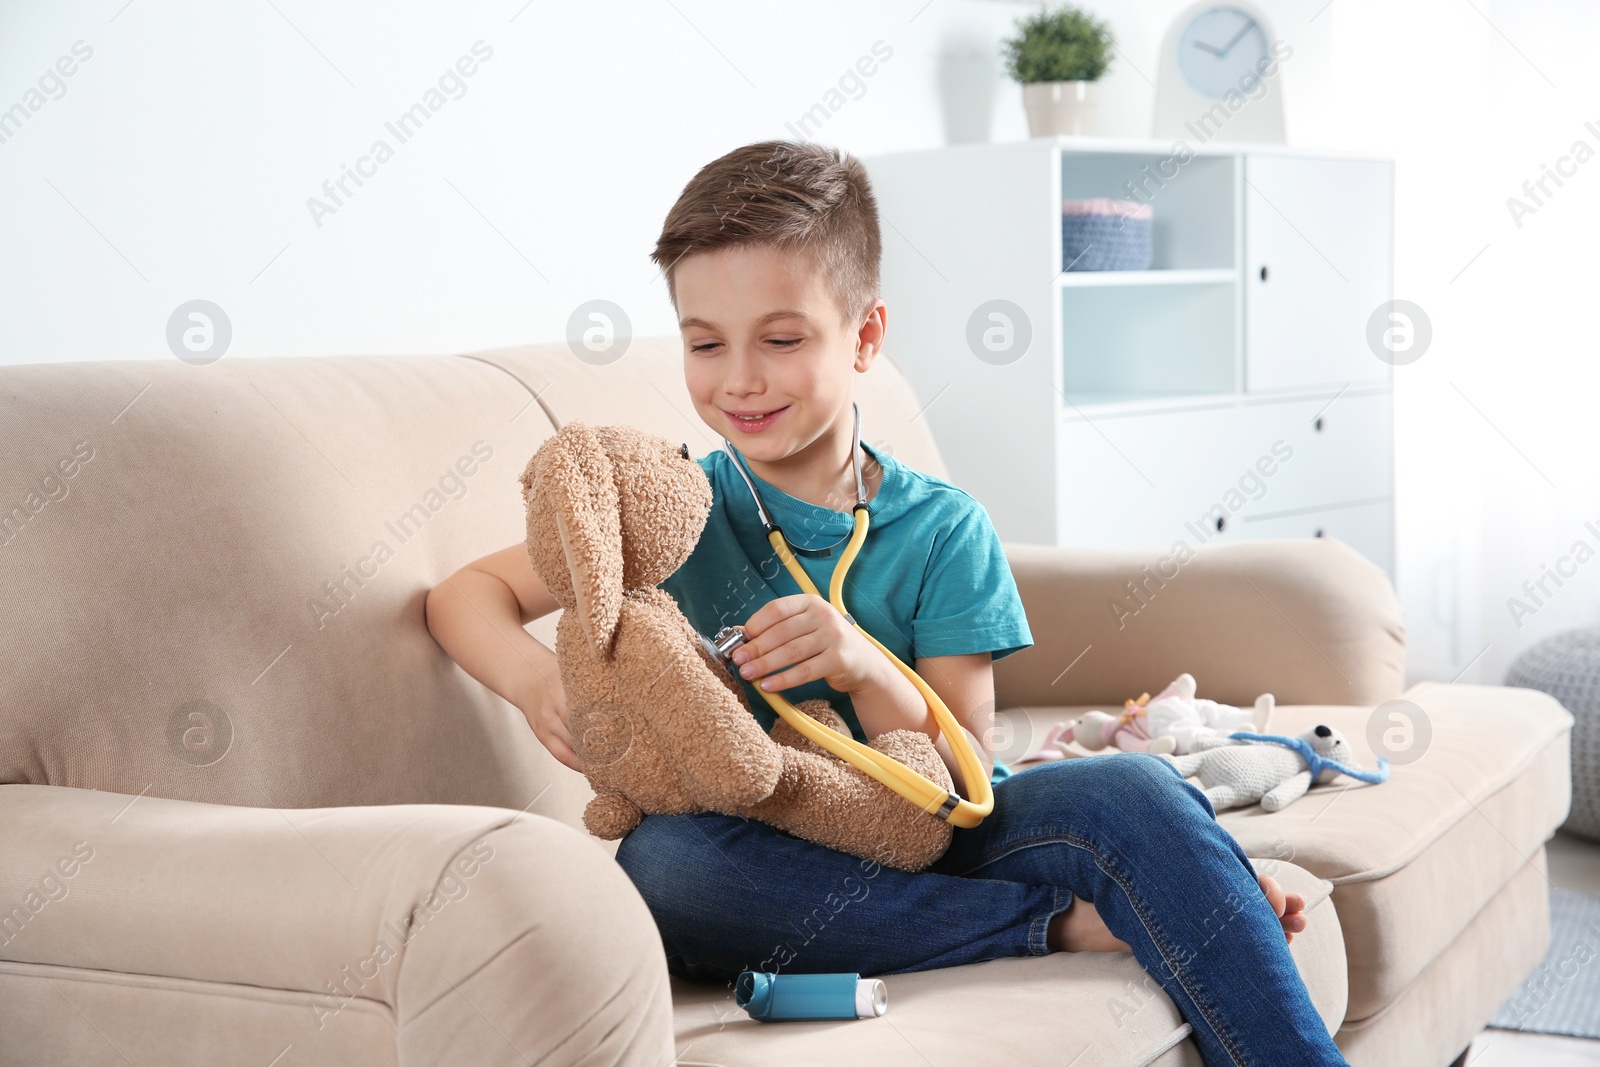 Photo of Cute child imagining himself as doctor while playing with stethoscope and toy bunny at home